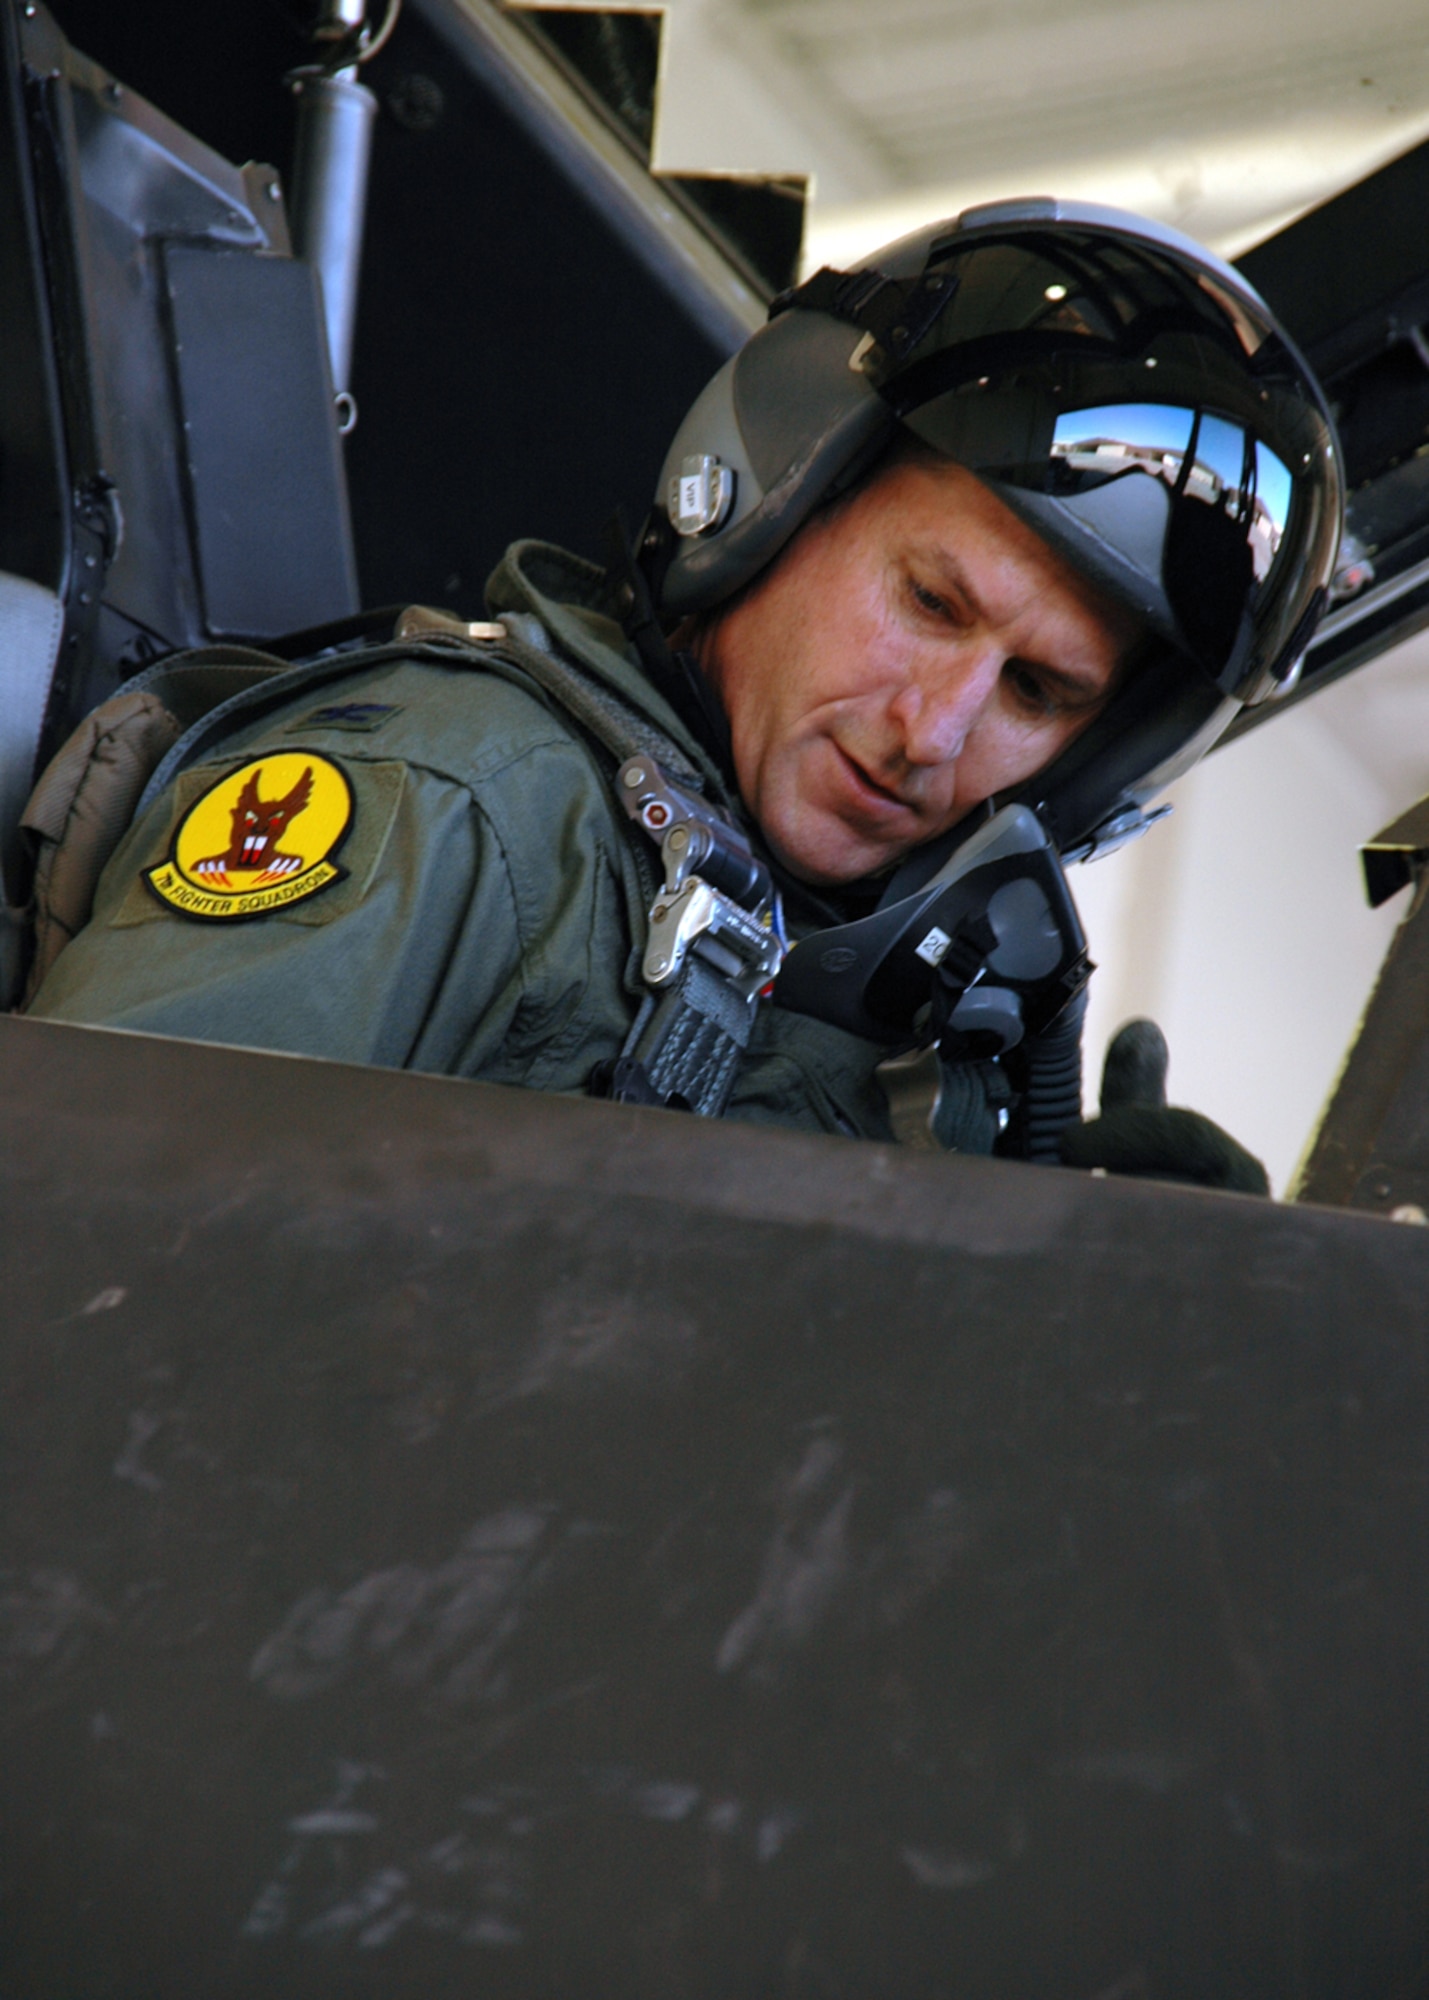 Colonel David Goldfein, Commander, 49th Fighter Wing, prepares before flight on F-117 on September 14, 2006, Holloman Air Force Base, New Mexico. This will be Col. Goldfein's first flight of the F-117 since assuming command at Holloman. US Air Force photo by Airman Jamal Sutter.